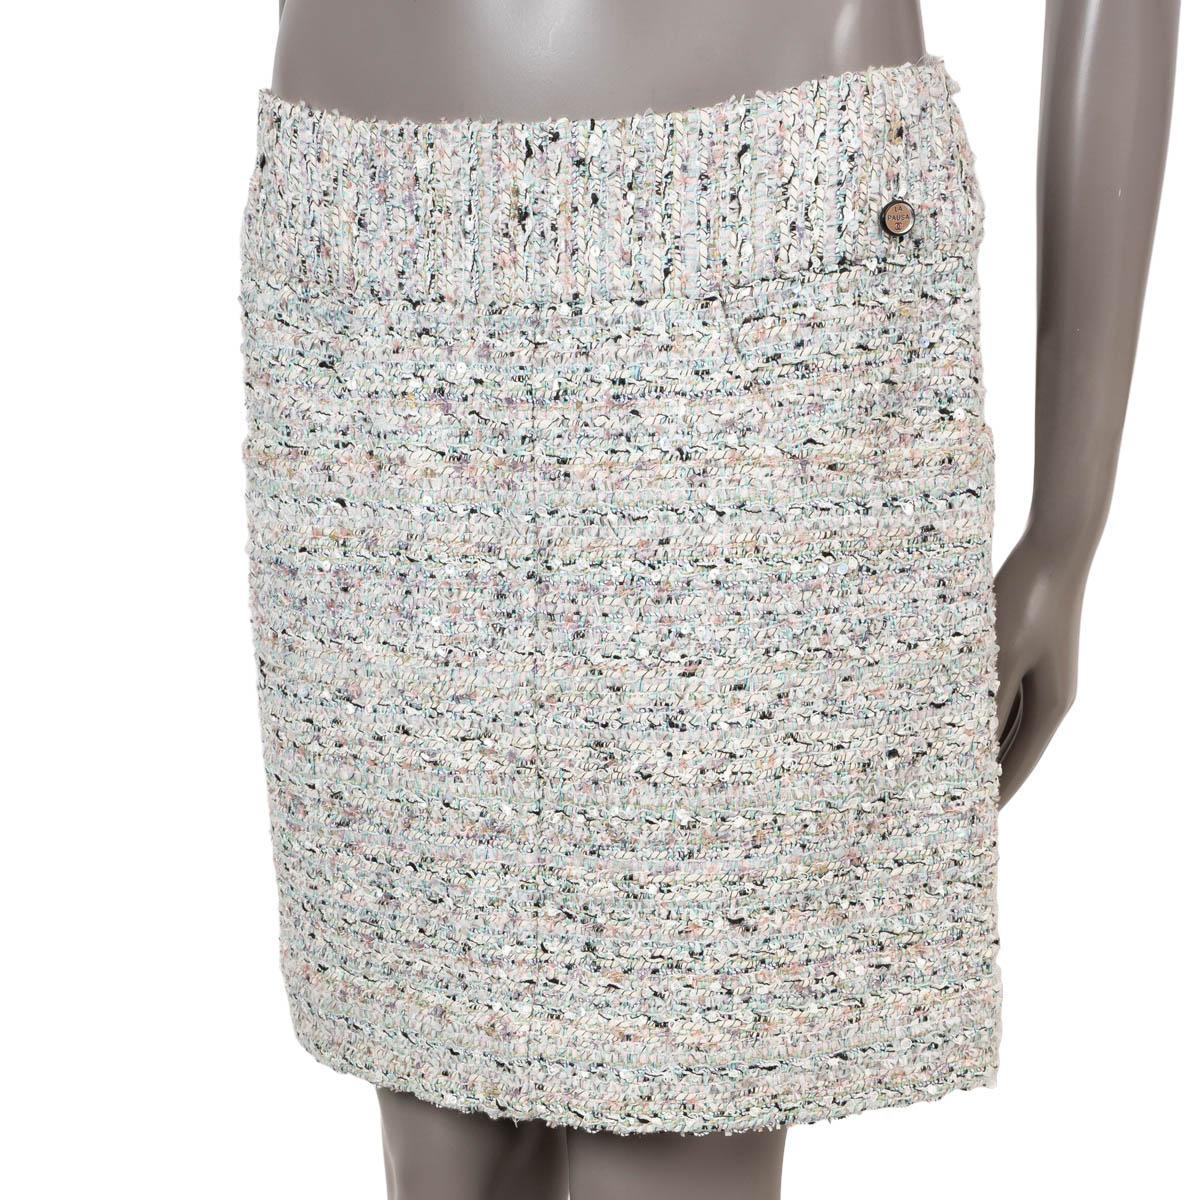 100% authentic Chanel sequin tweed mini skirt white, turquoise and pale pink cotton (49%), polyamide (20%), polyester (18%), acetate (6%), acrylic (6%) and viscose (1%). Features two slit pockets on the front and a little enamel La Pausa button at